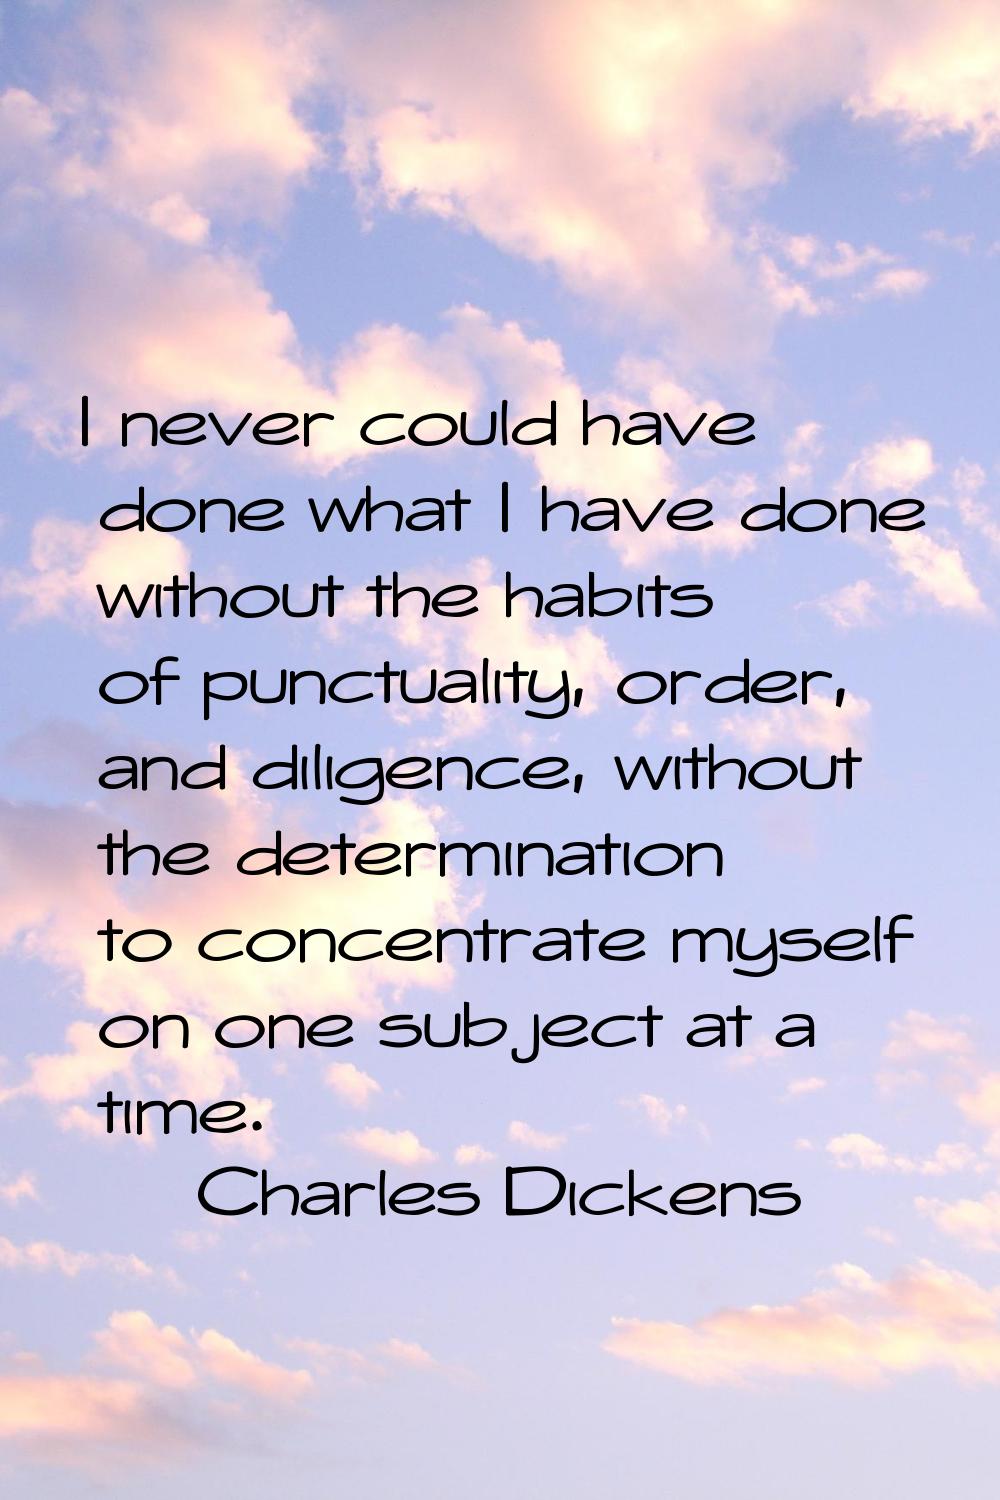 I never could have done what I have done without the habits of punctuality, order, and diligence, w